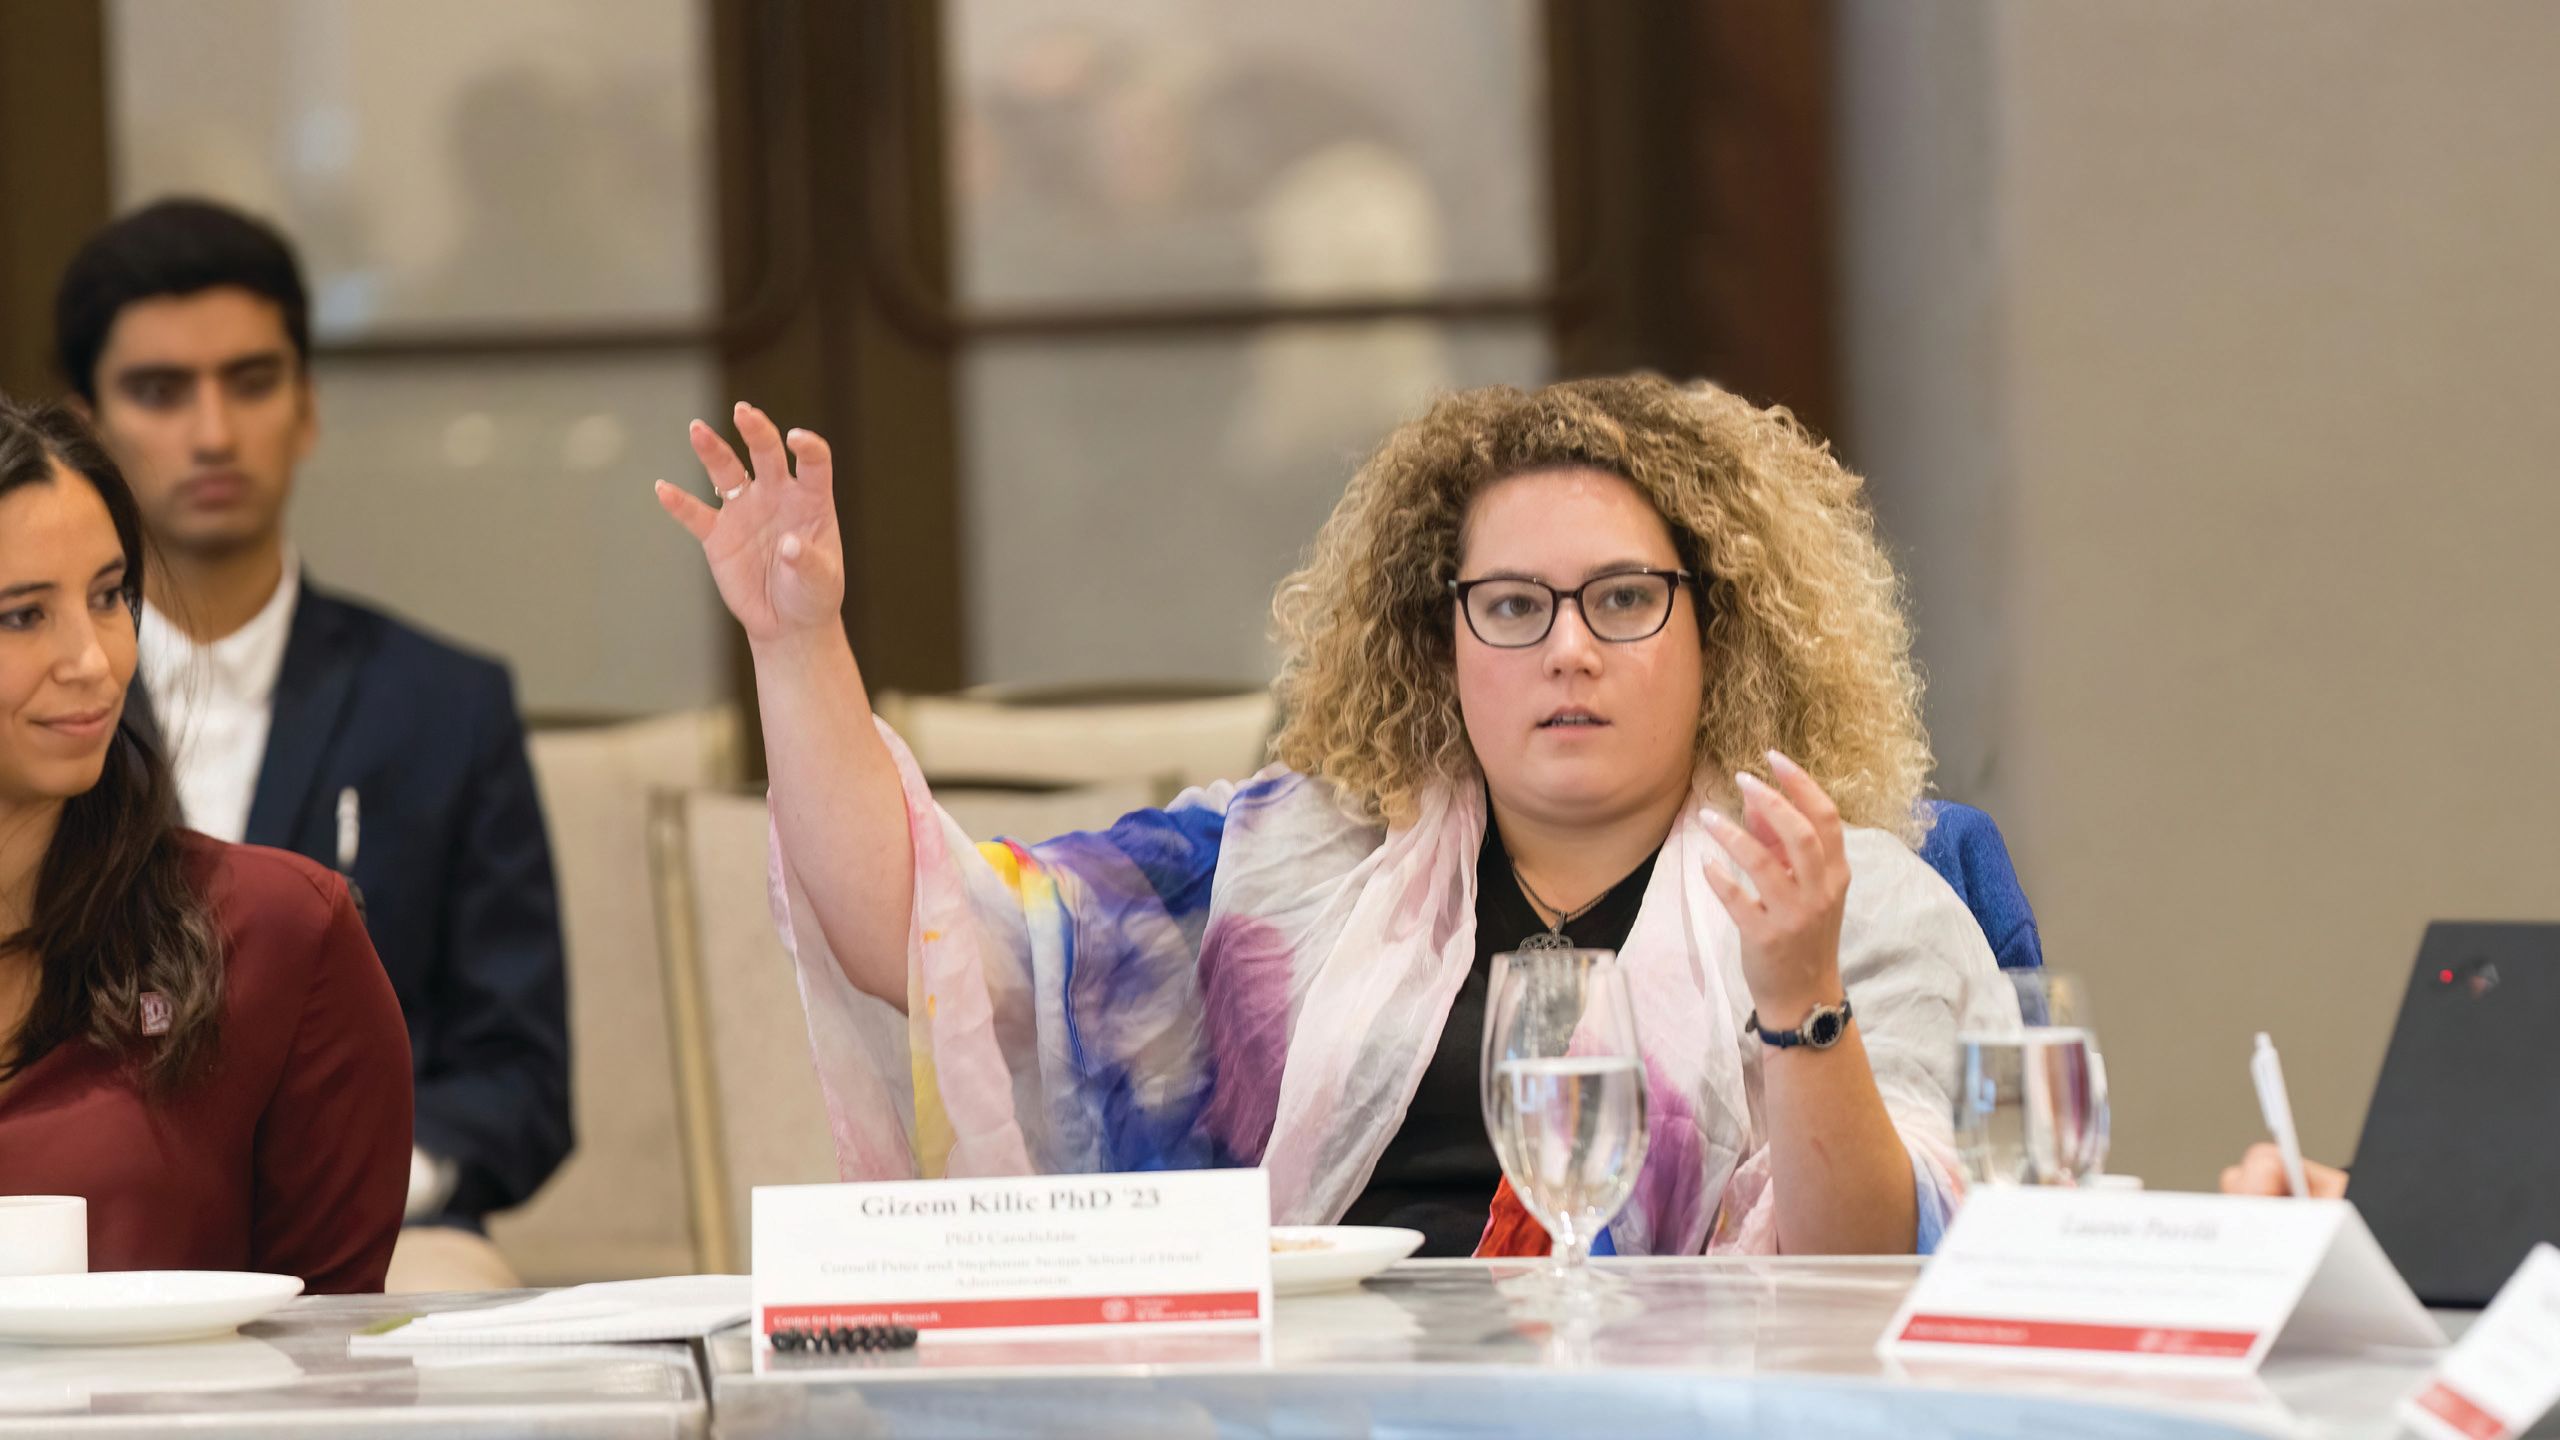 A student speaks with her hands during a CIHLER roundtable in September 2022.